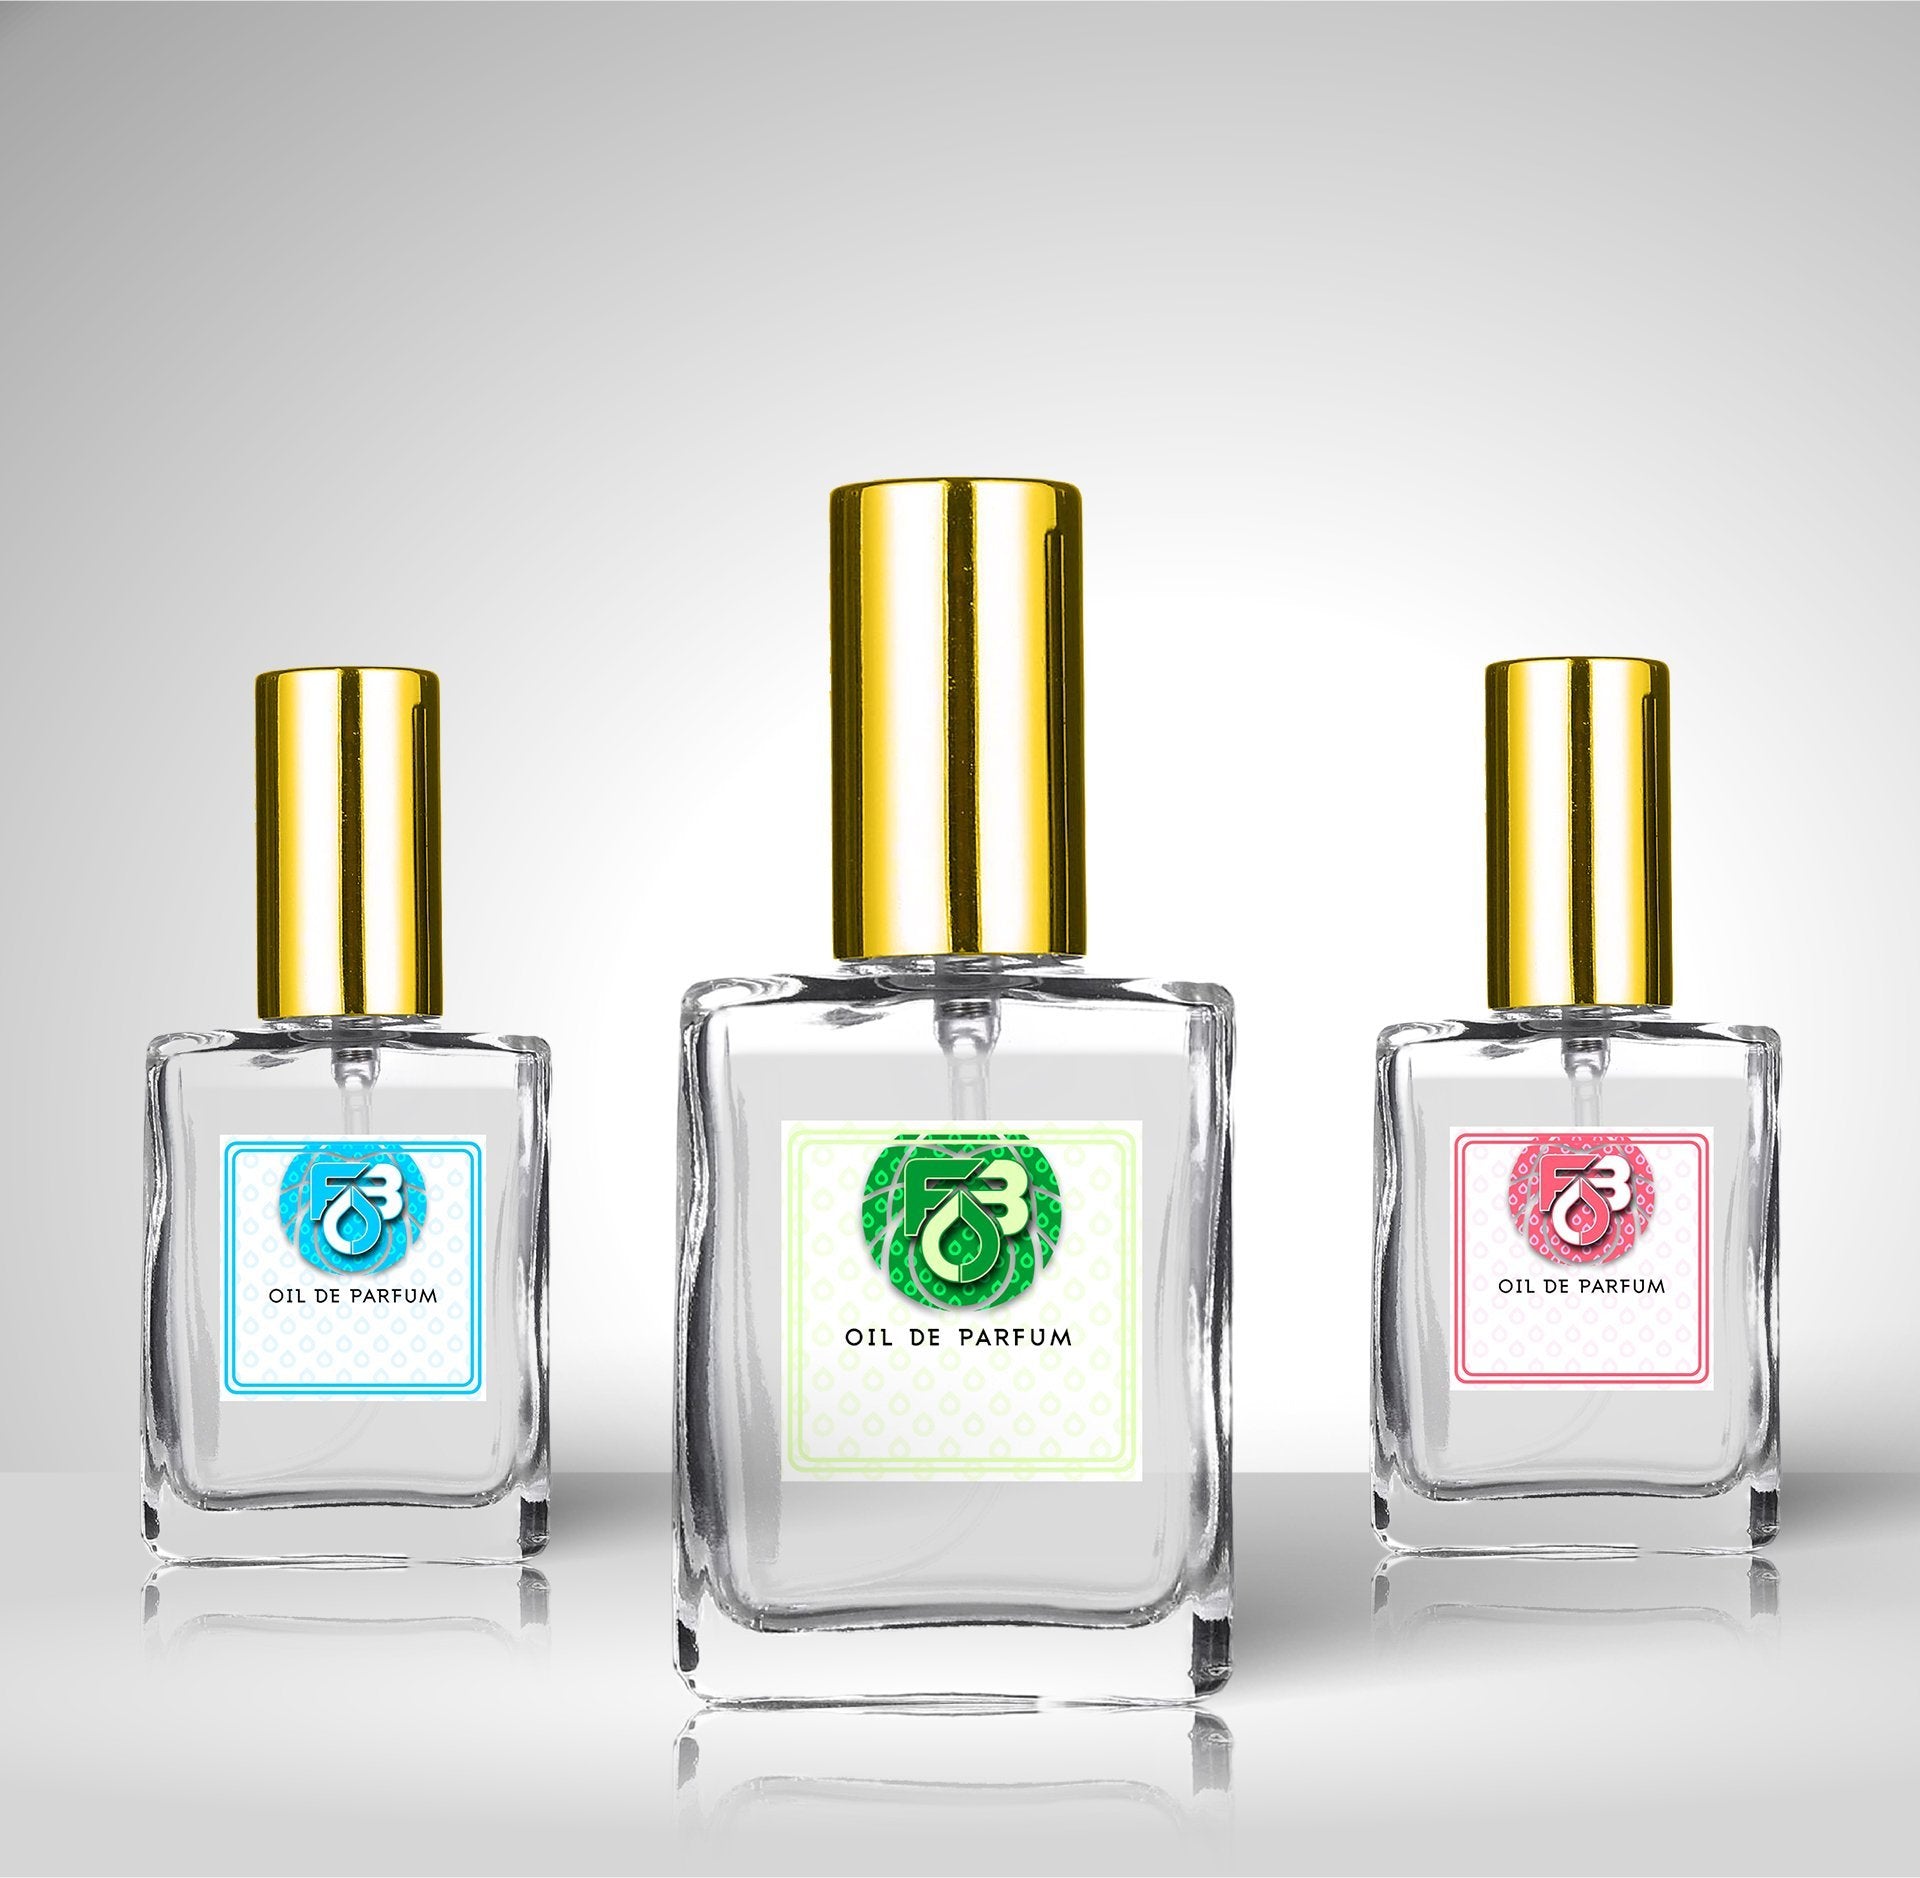 Compare Aroma to Sailing Day®